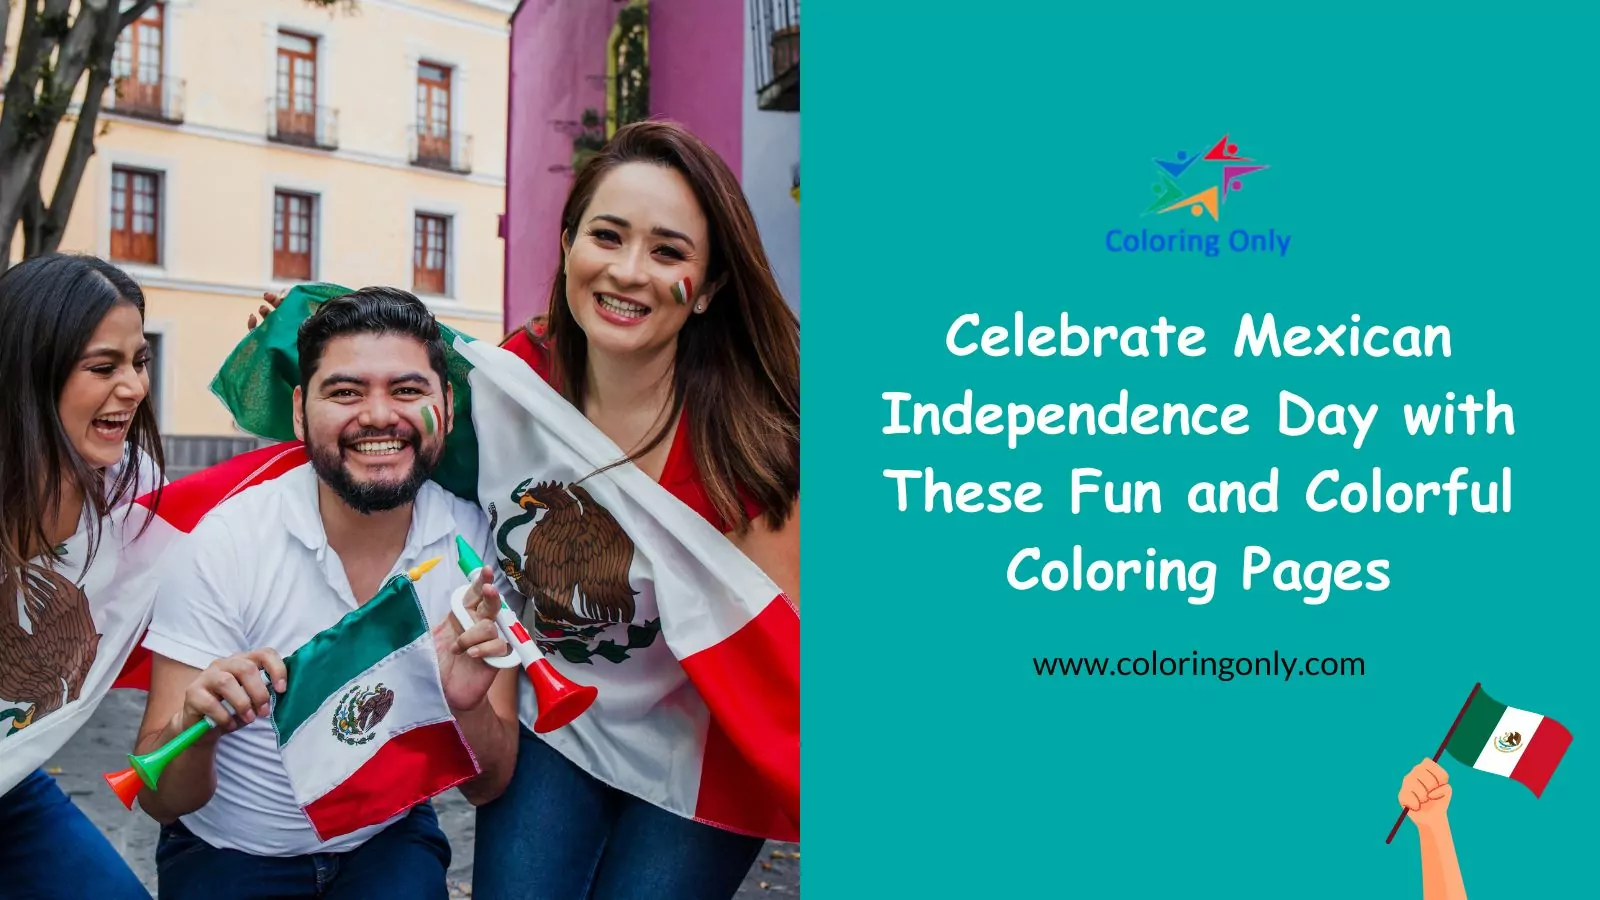 Celebrate Mexican Independence Day with These Fun and Colorful Coloring Pages